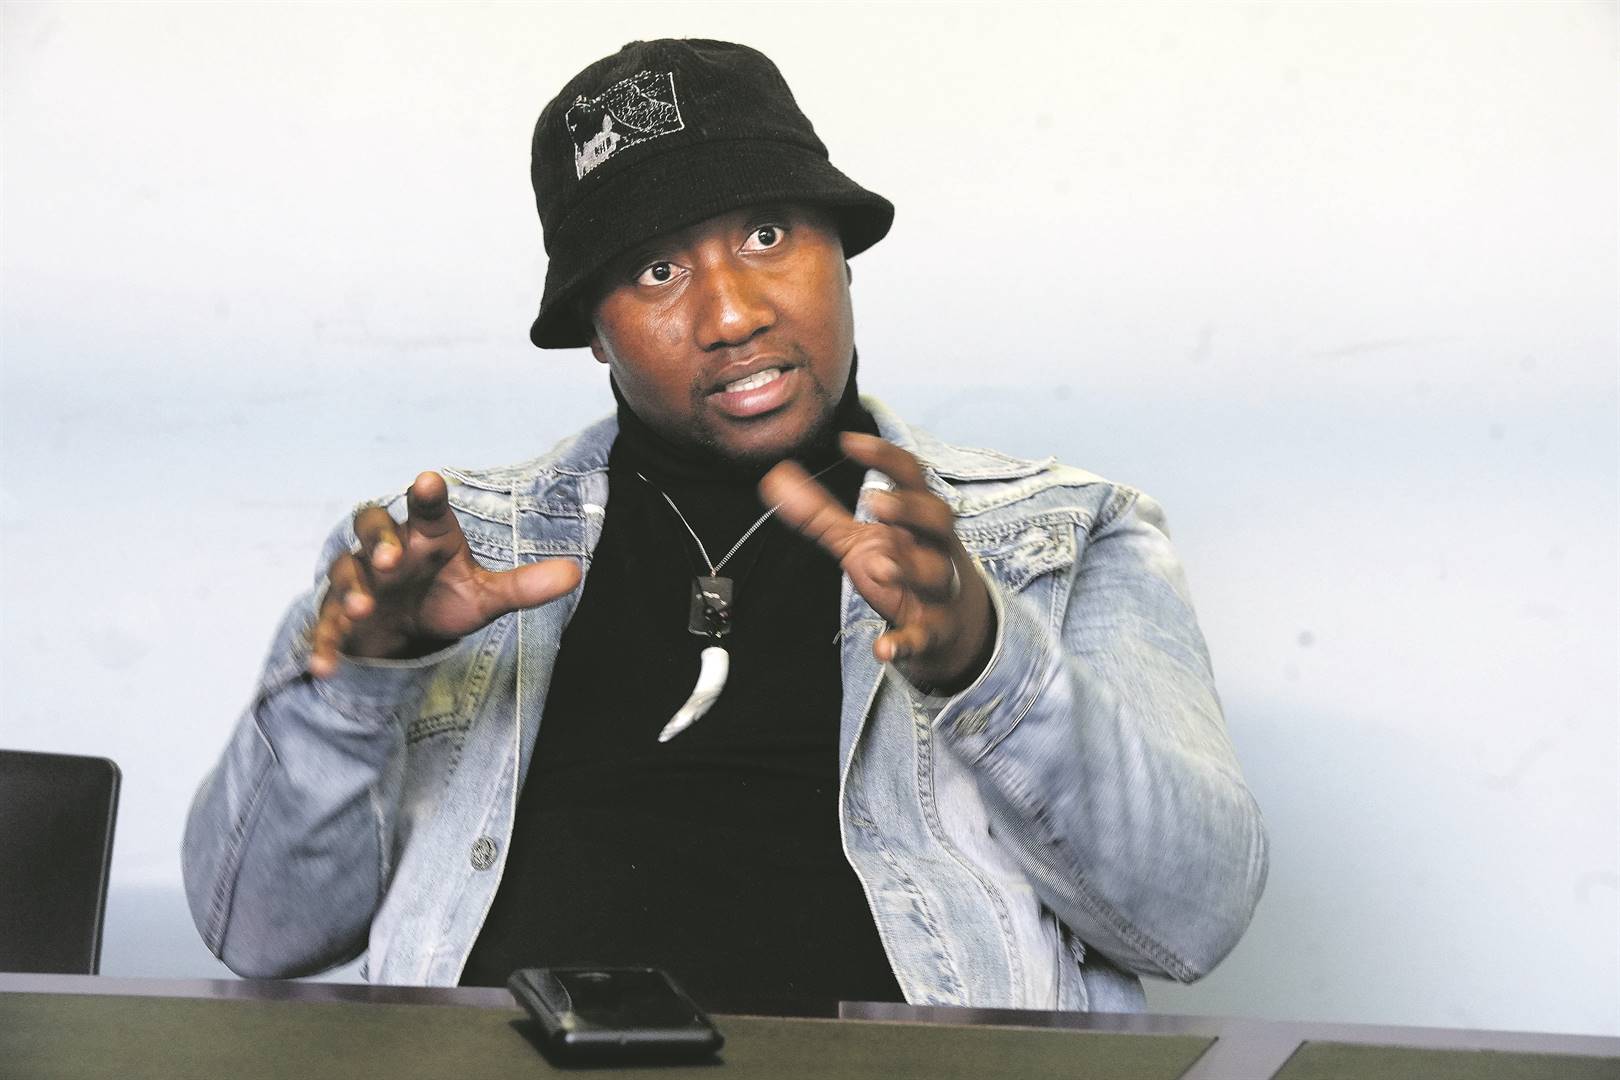 Xolani Khumalo could find himself in hot water again as he is being accused of another murder.